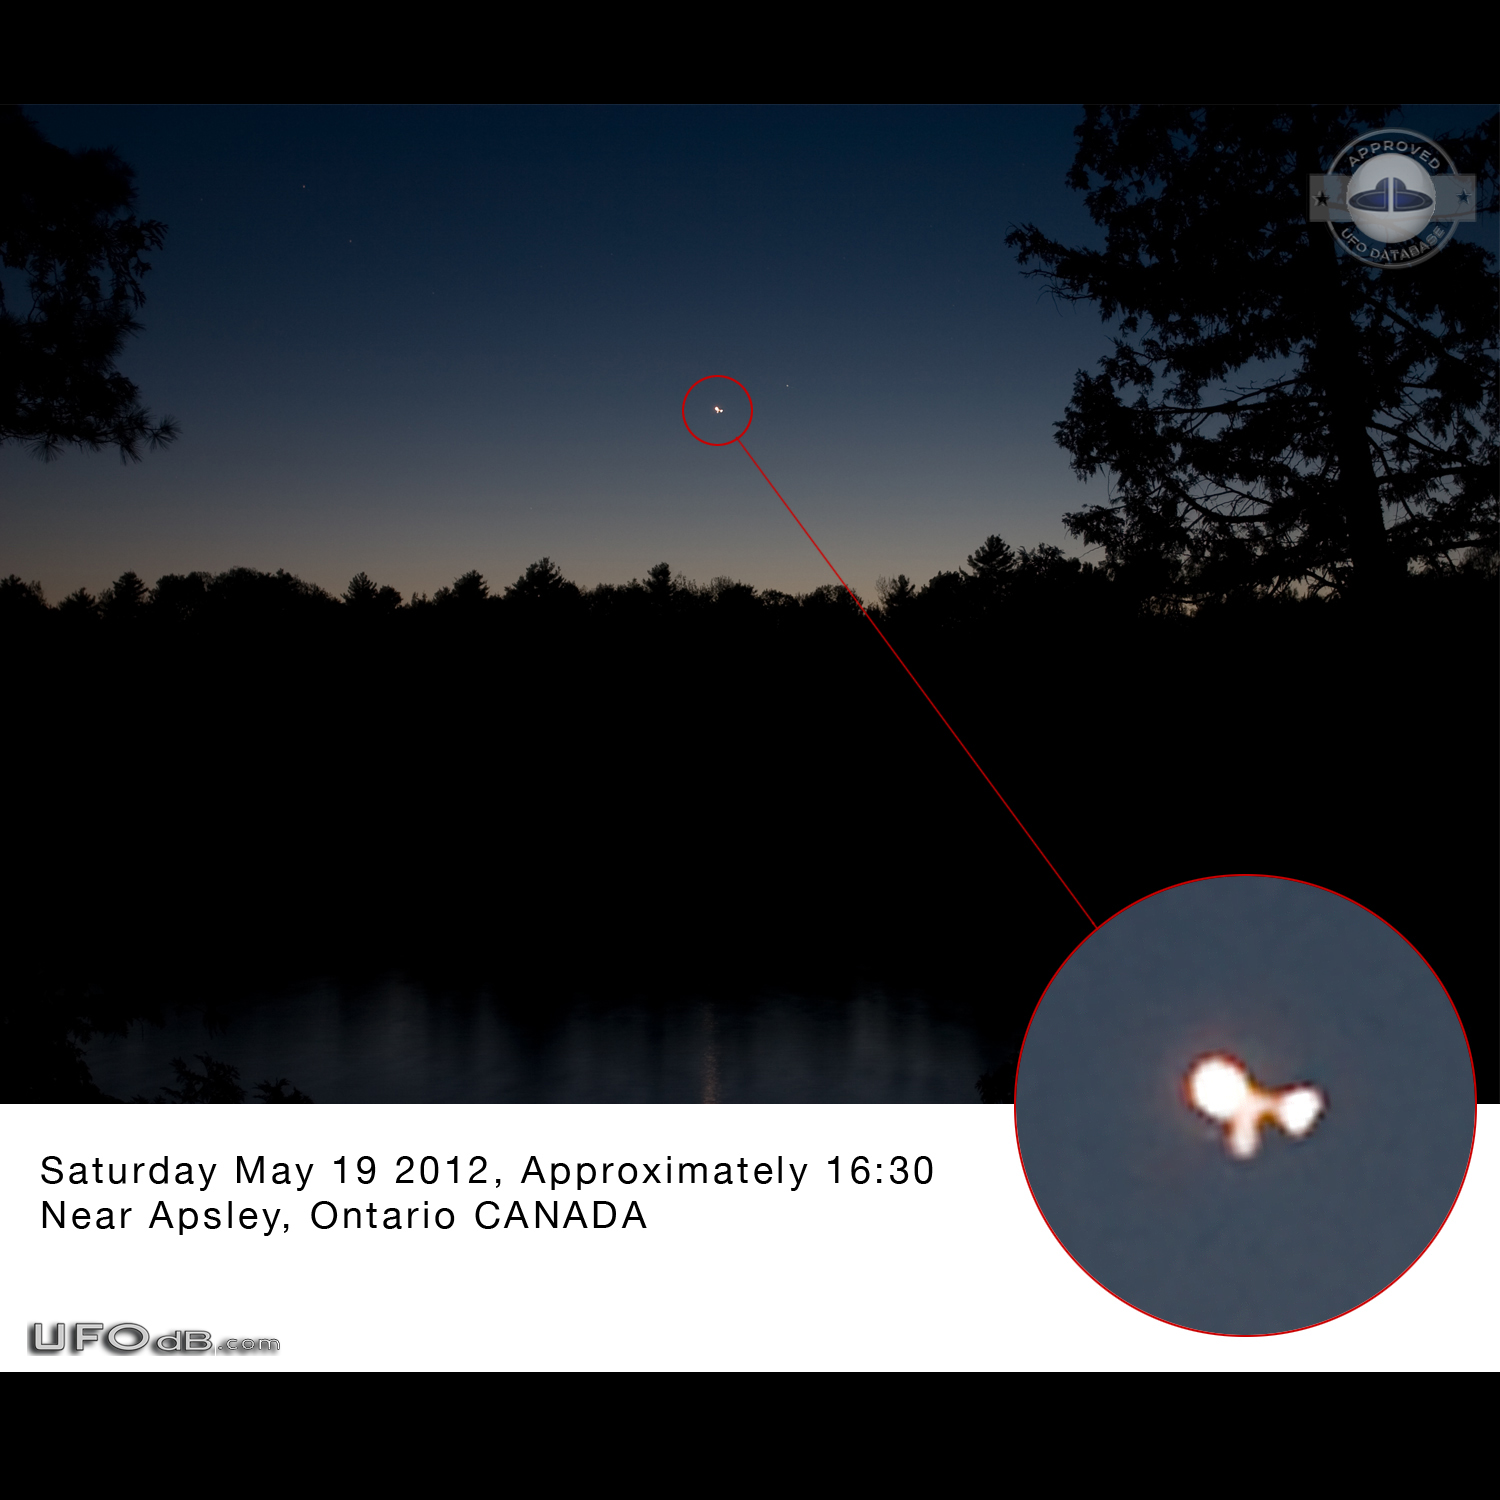 Mysterious Lights UFOS Observed Near Apsley Ontario Canada 2015 UFO Picture #721-4